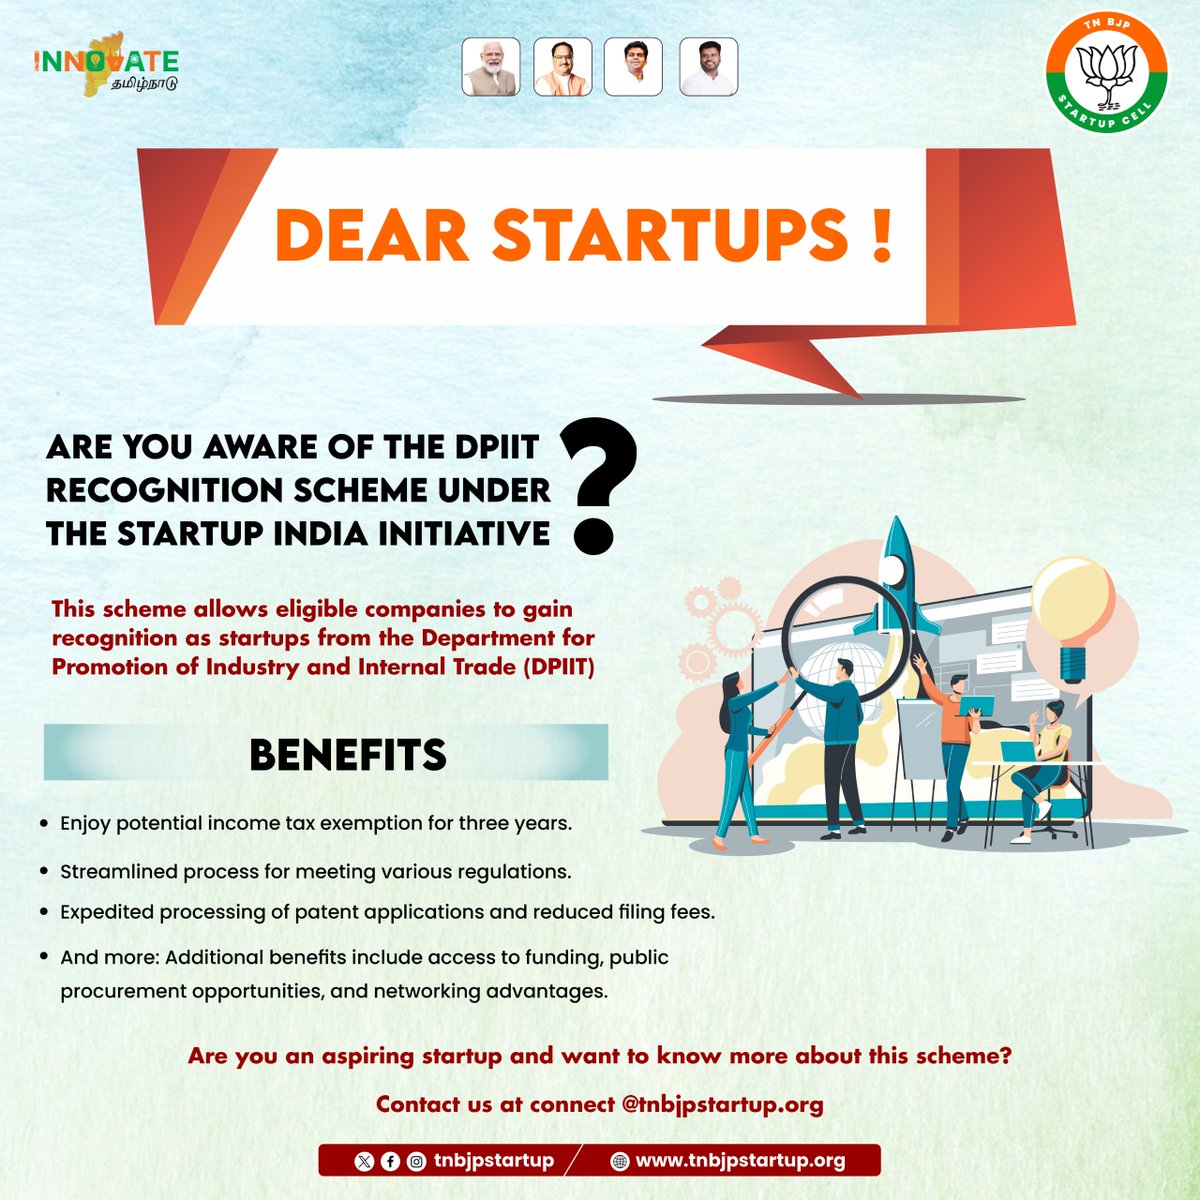 Start your startup journey with DPIIT Recognition Scheme! Get tax exemptions, easier processes, and more benefits. Contact us at connect@tnbjpstartup.org to learn how.   

#innovatetn #StartupIndia #DPIITRecognition @TenkasiAnanthan